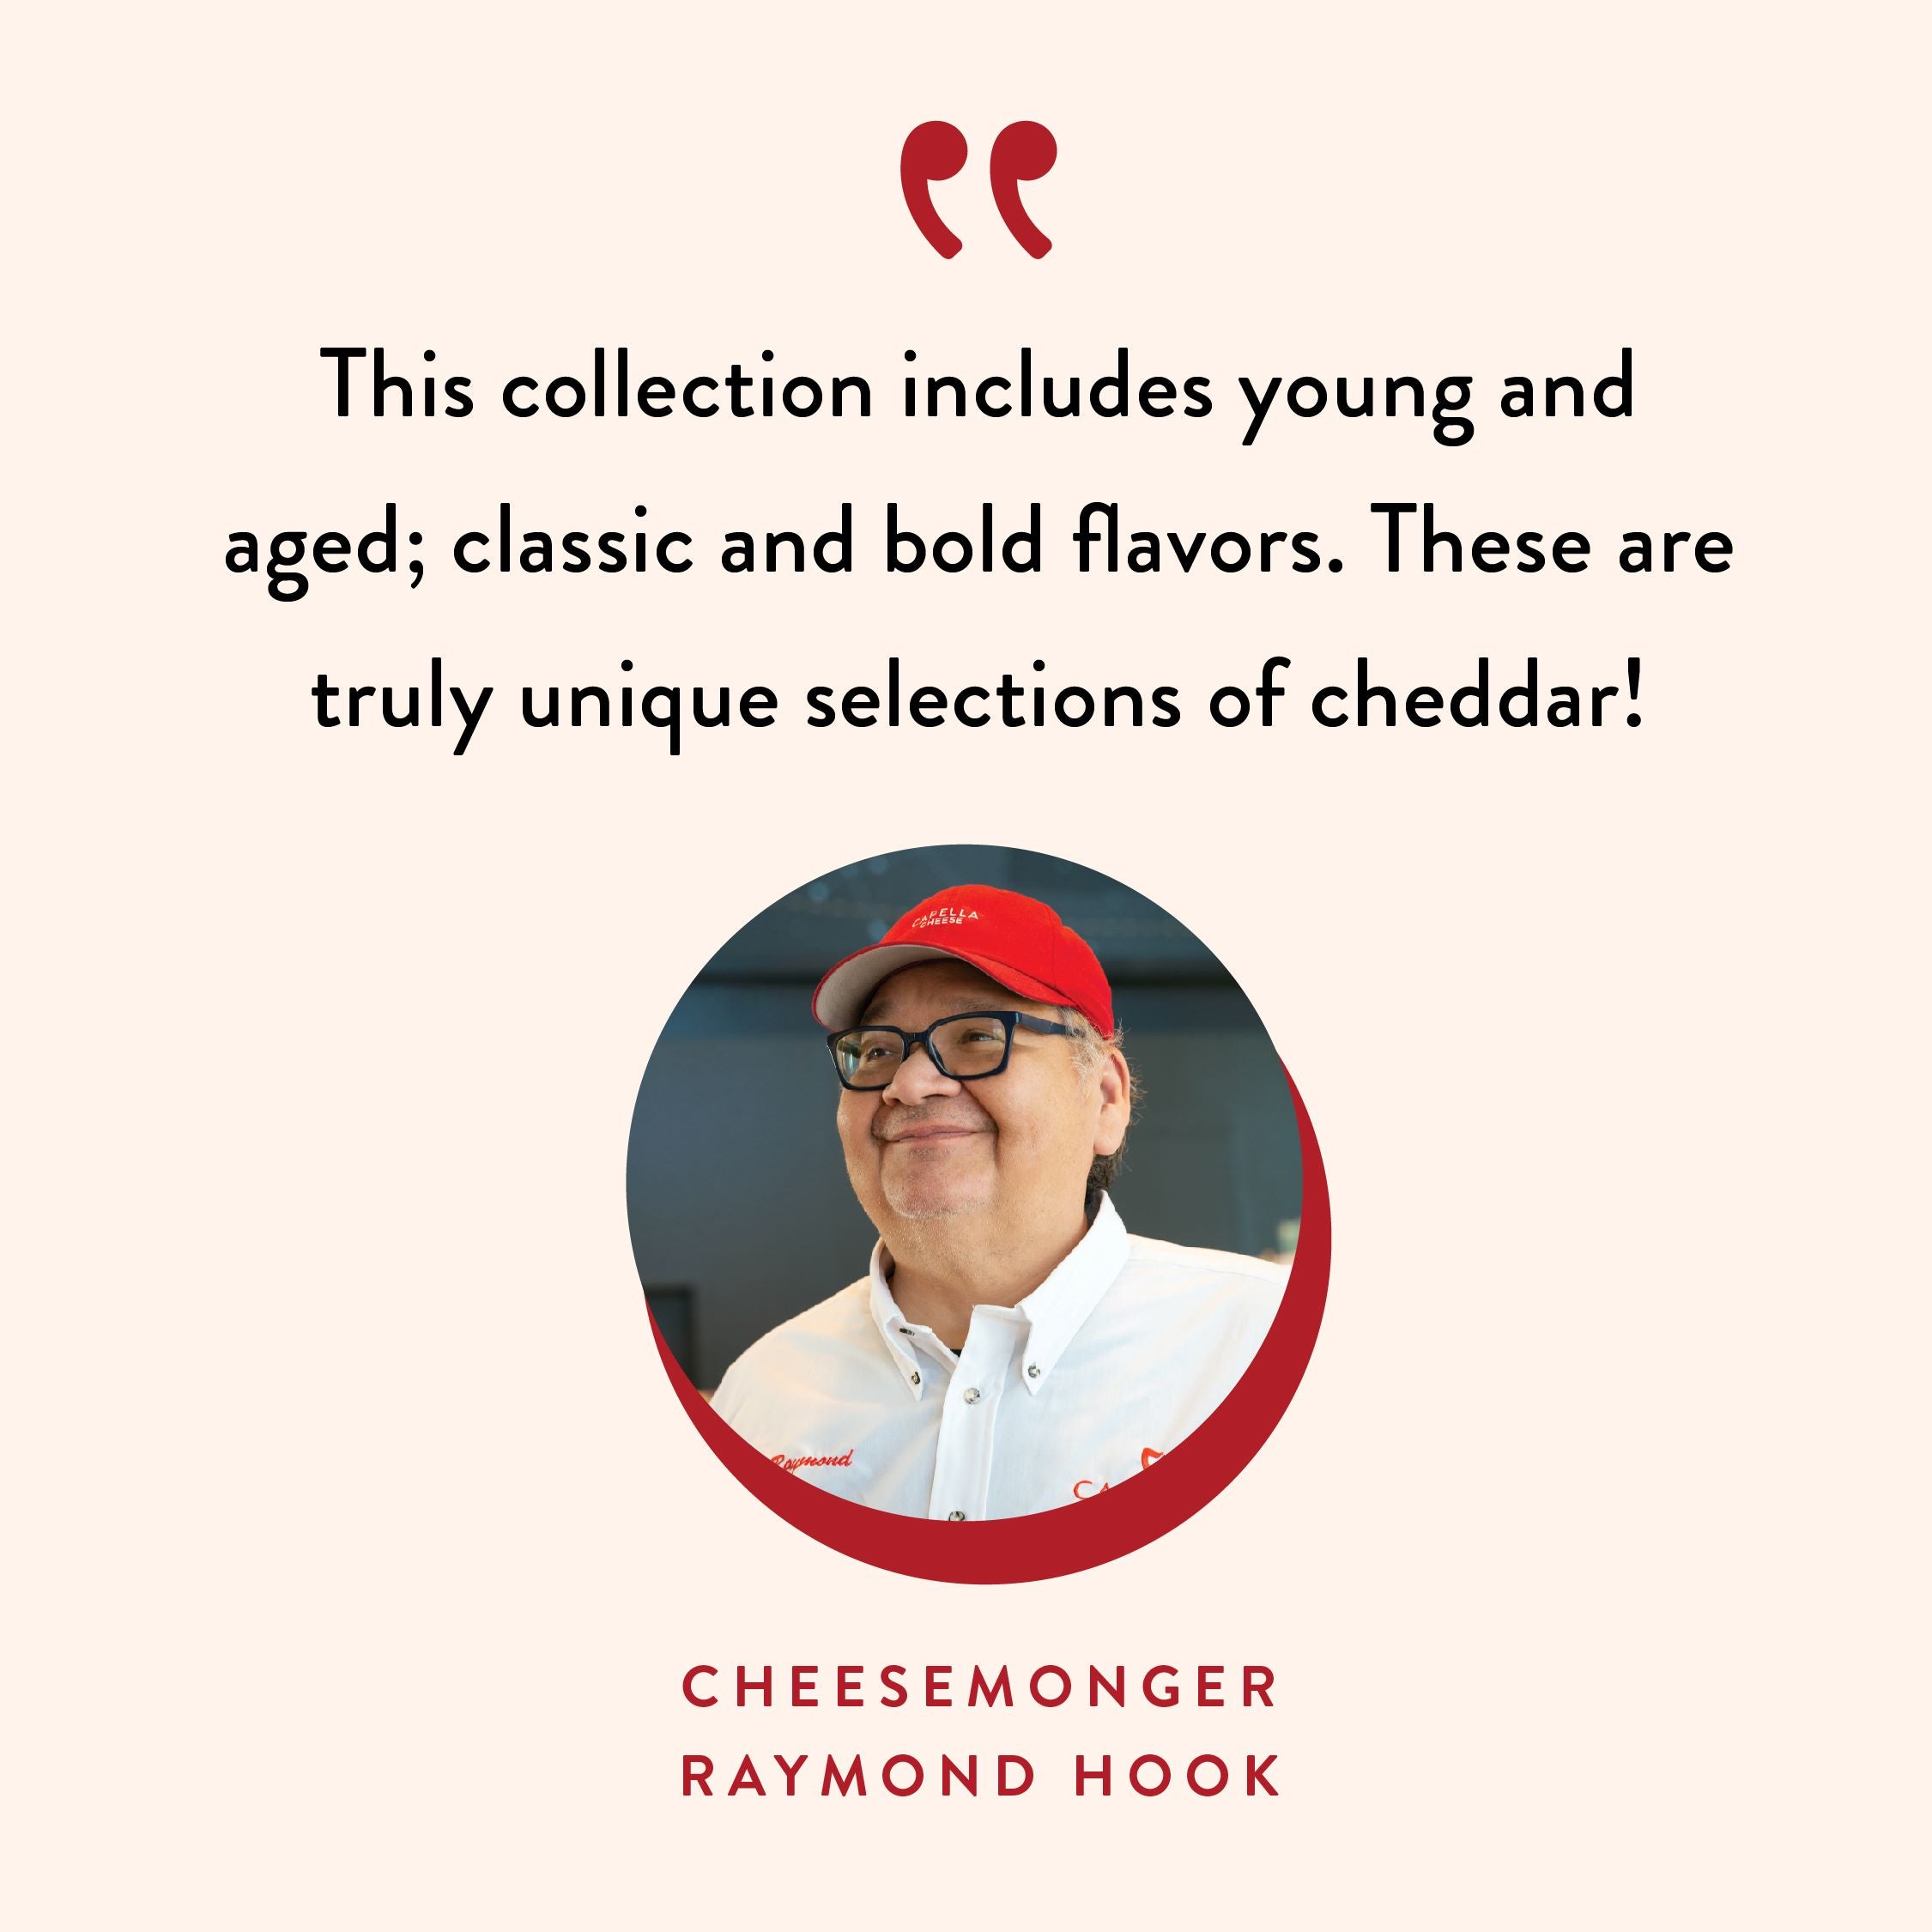 Cheddar collection quote